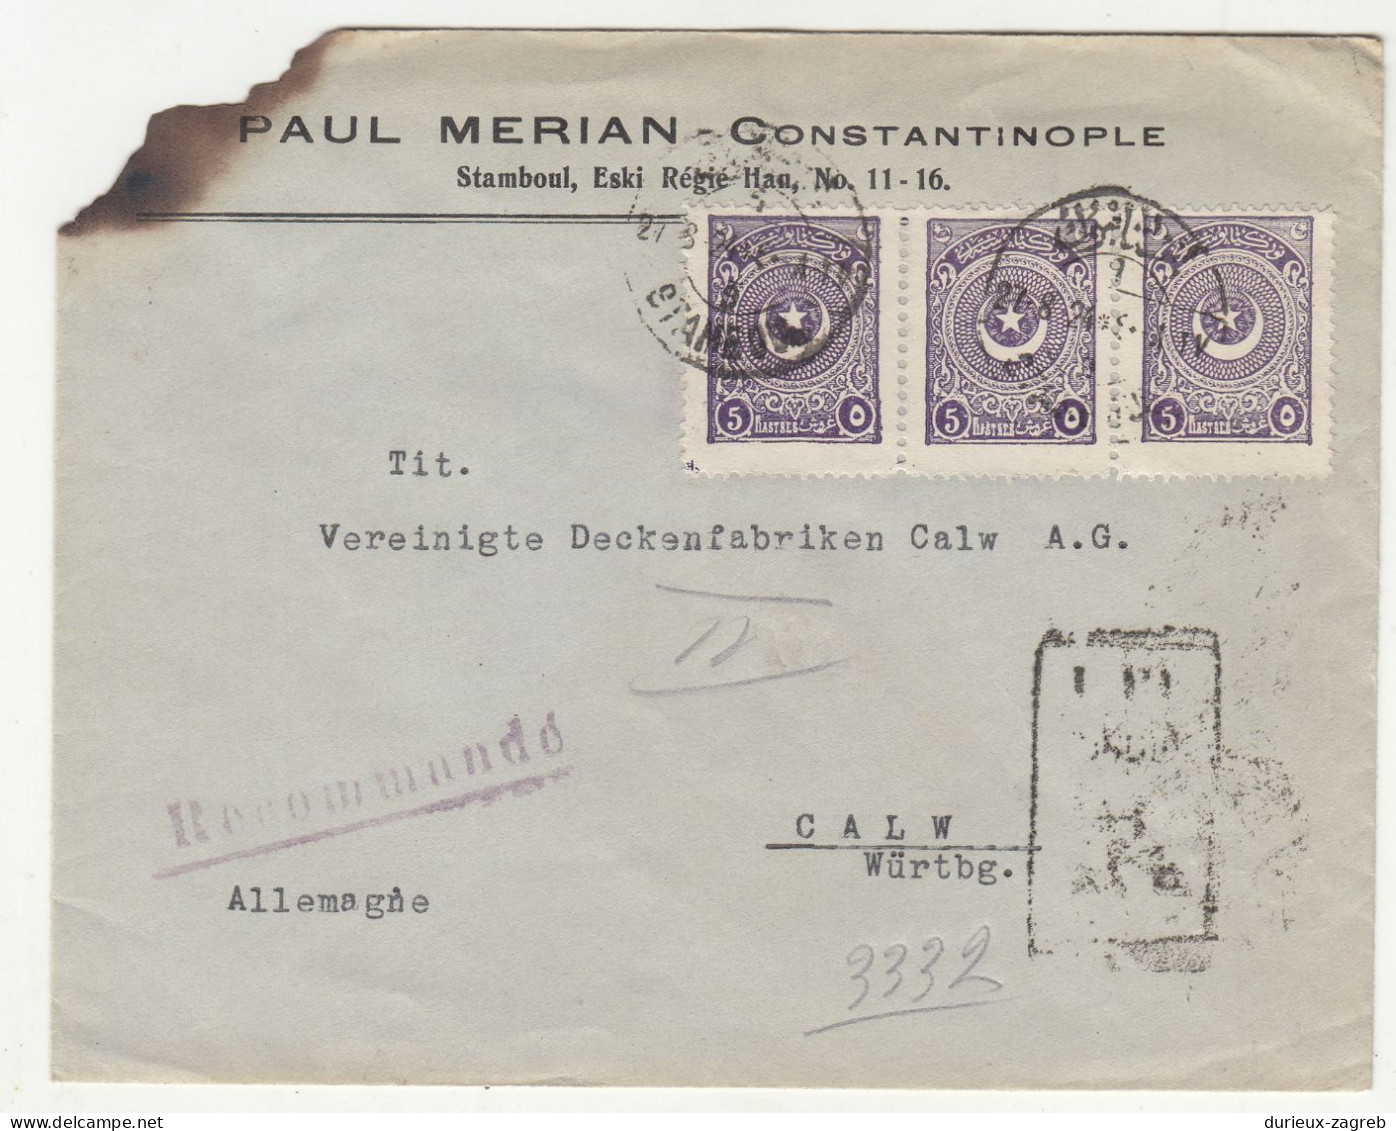 Paul Merian, Constantinople Company Letter Cover Posted Registered 1924 To Germany B230801 - Lettres & Documents